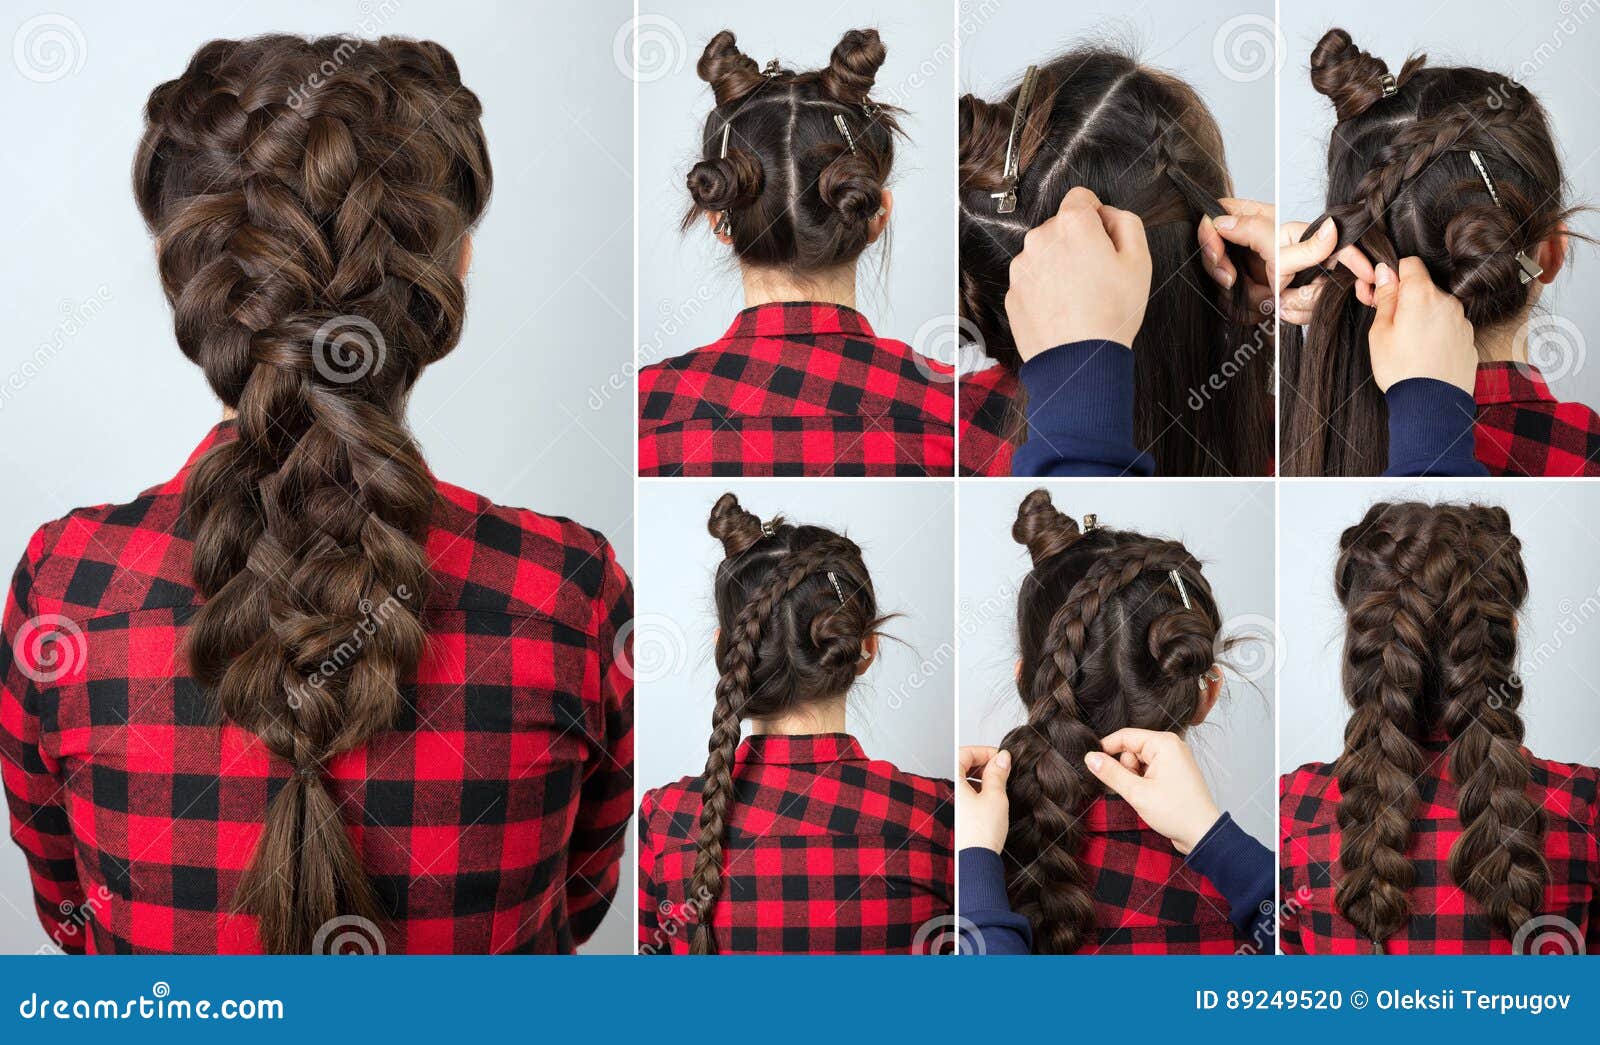 Hairstyle braid tutorial stock photo. Image of beauty - 89249520